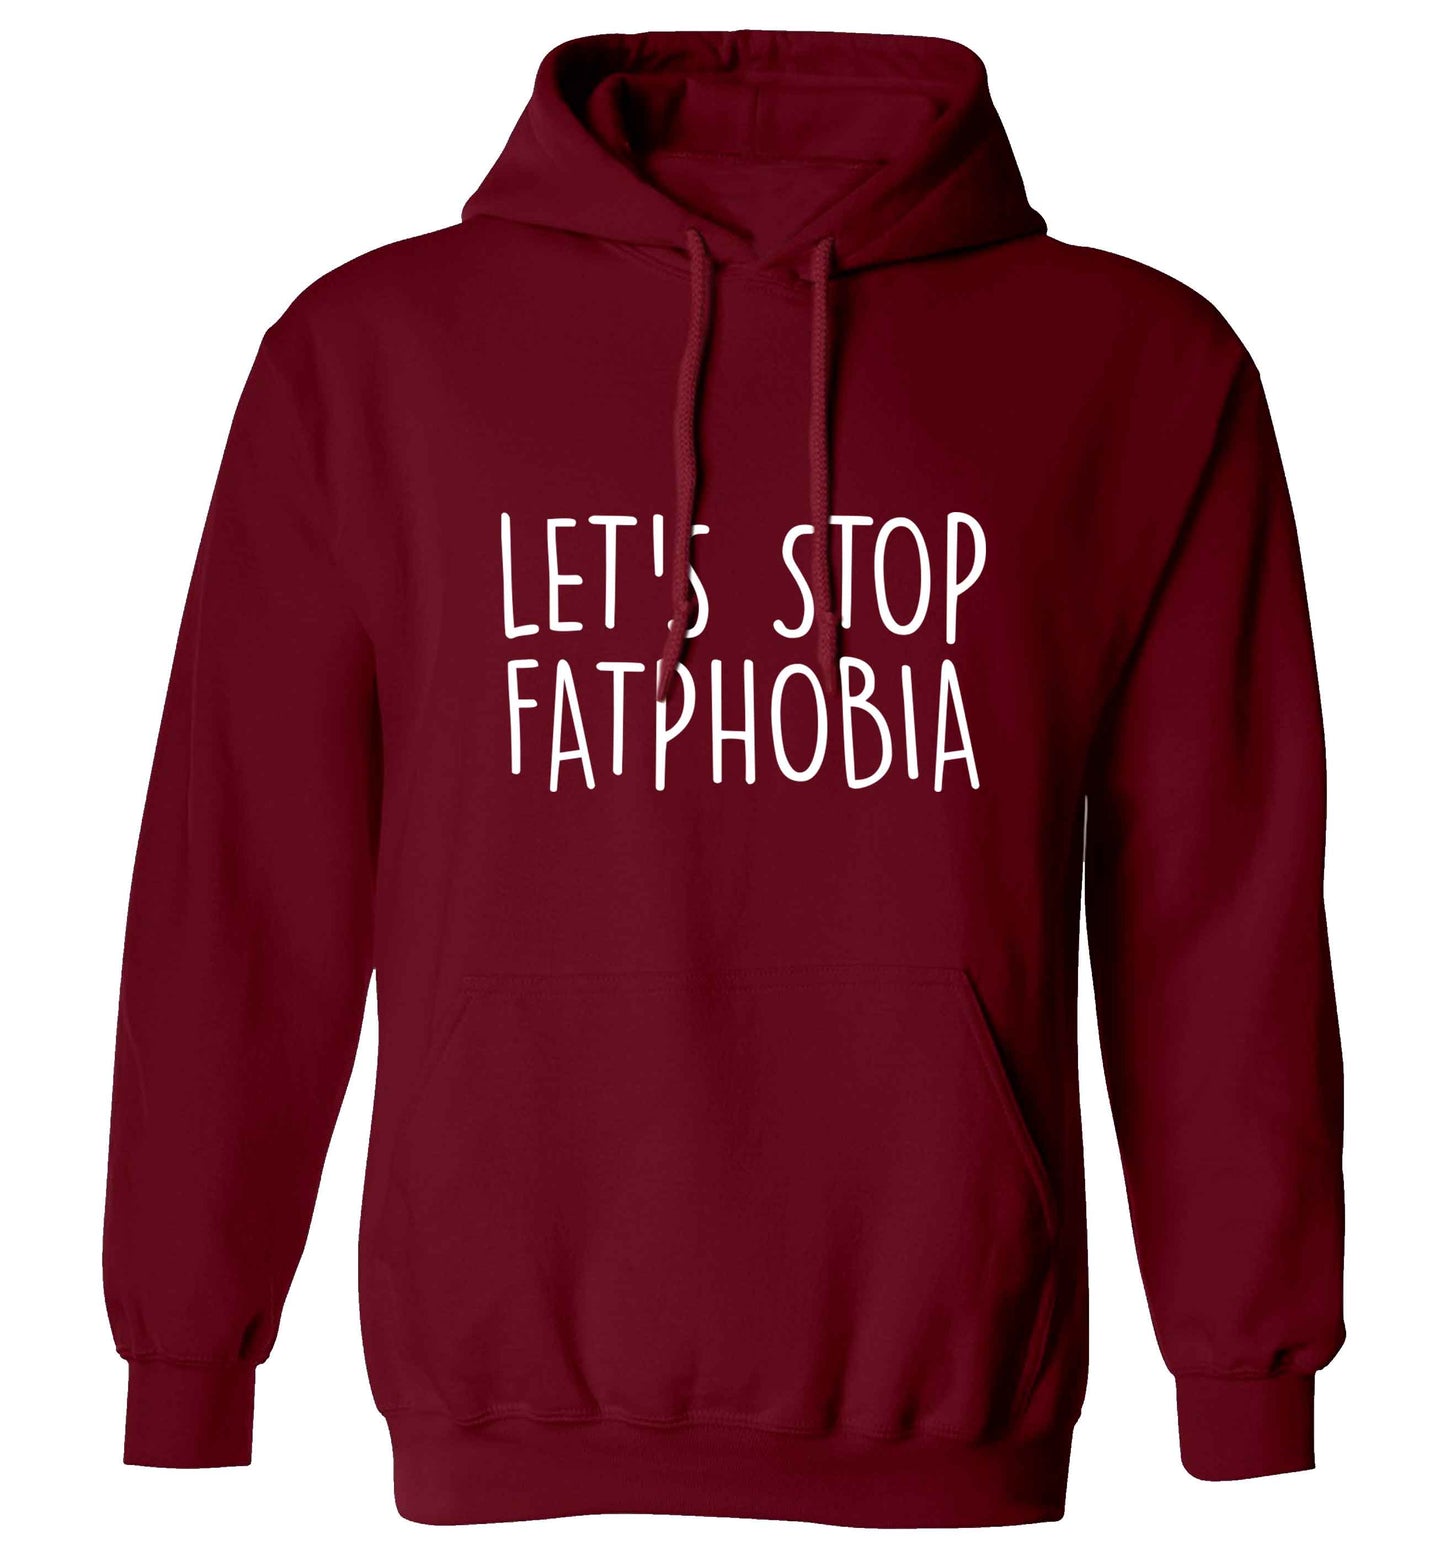 Let's stop fatphobia adults unisex maroon hoodie 2XL